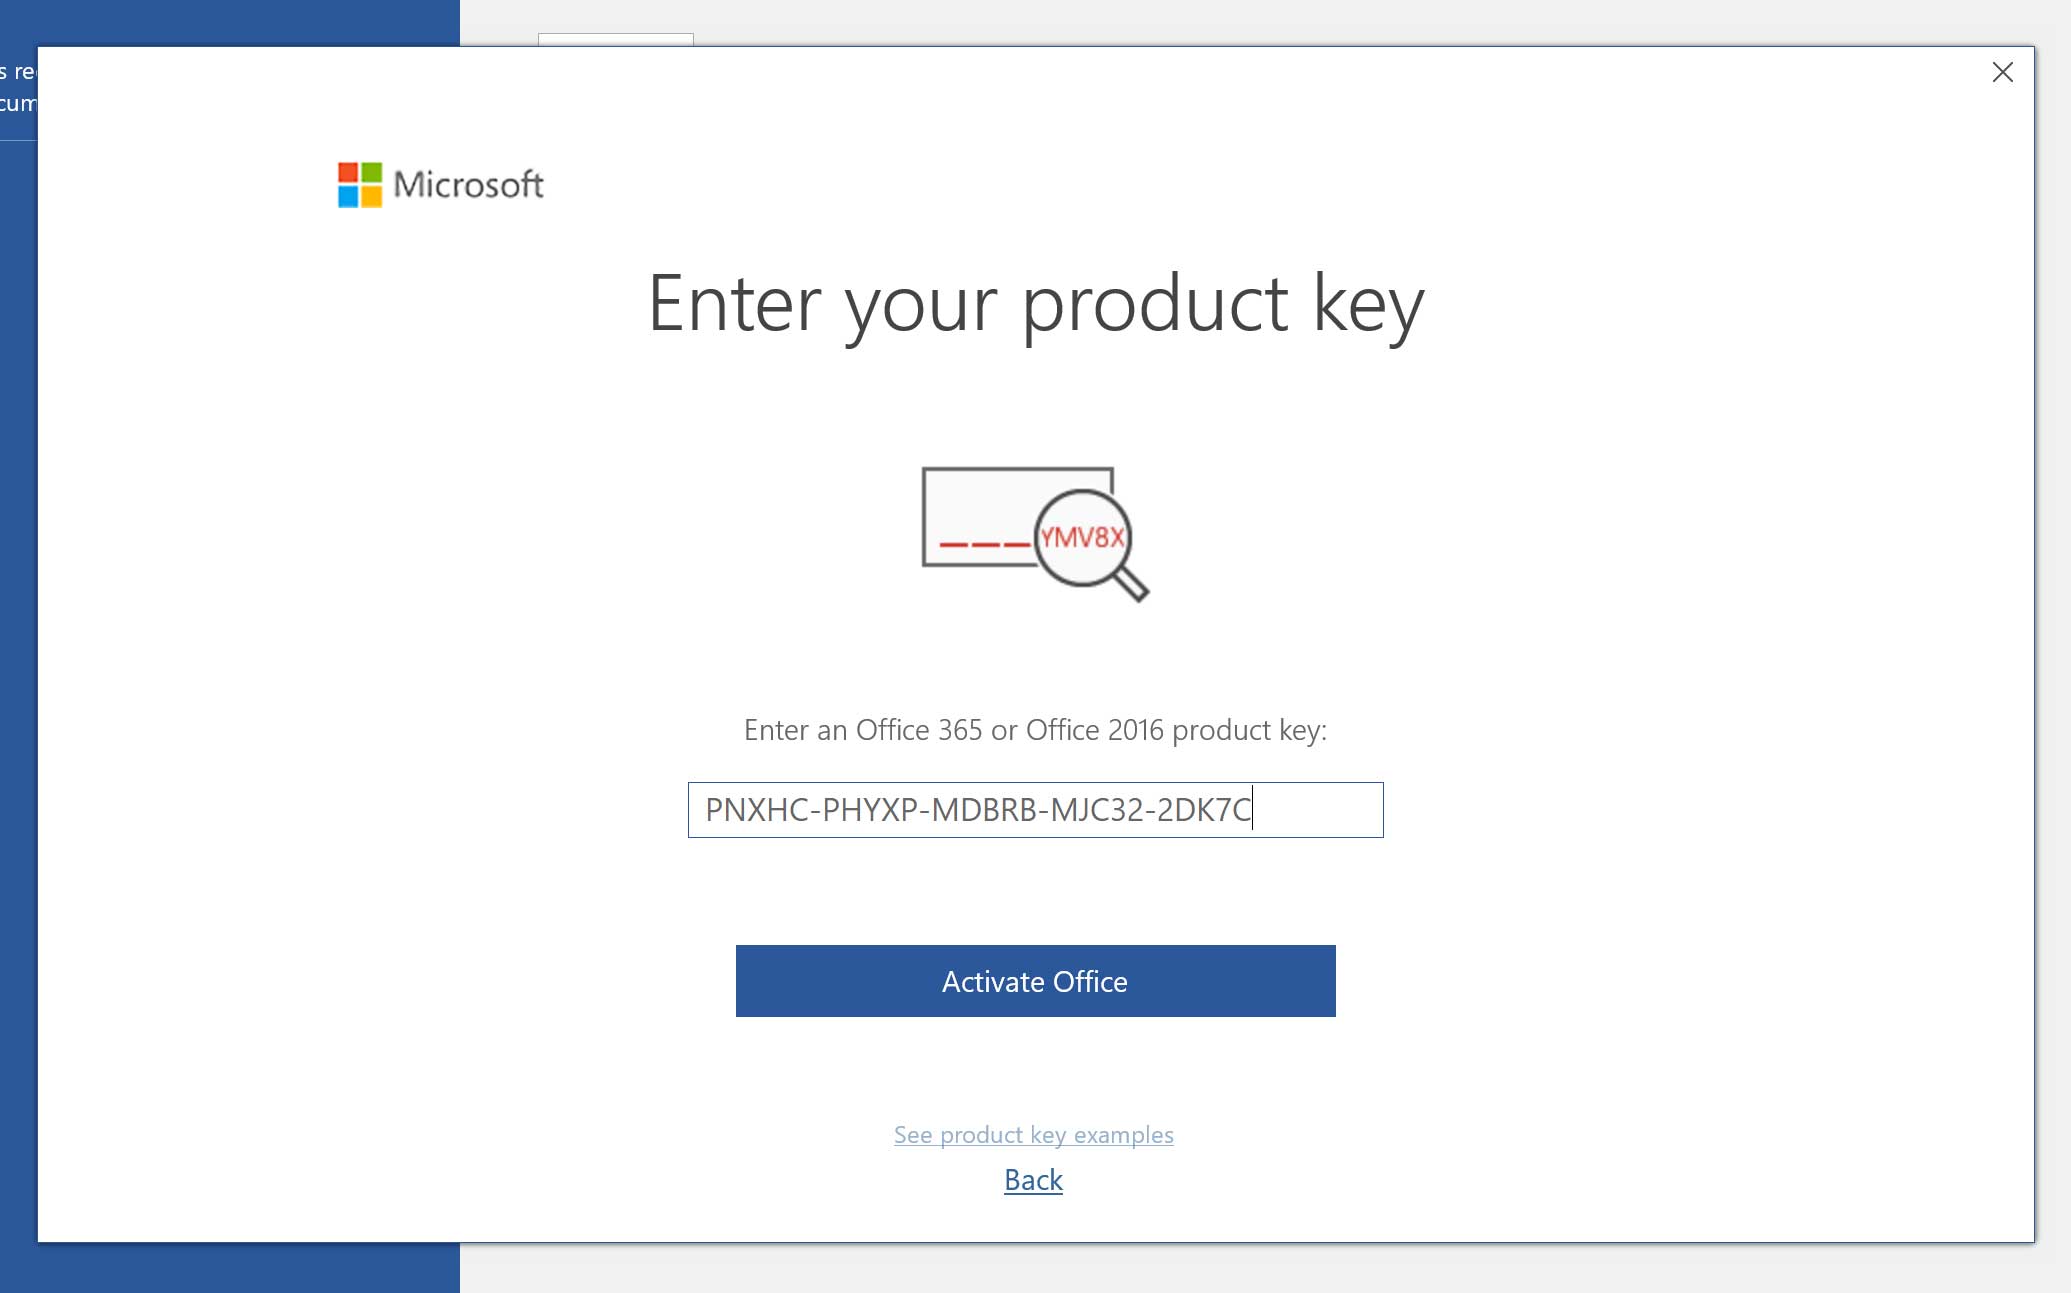 ms office 2016 activation key facebook